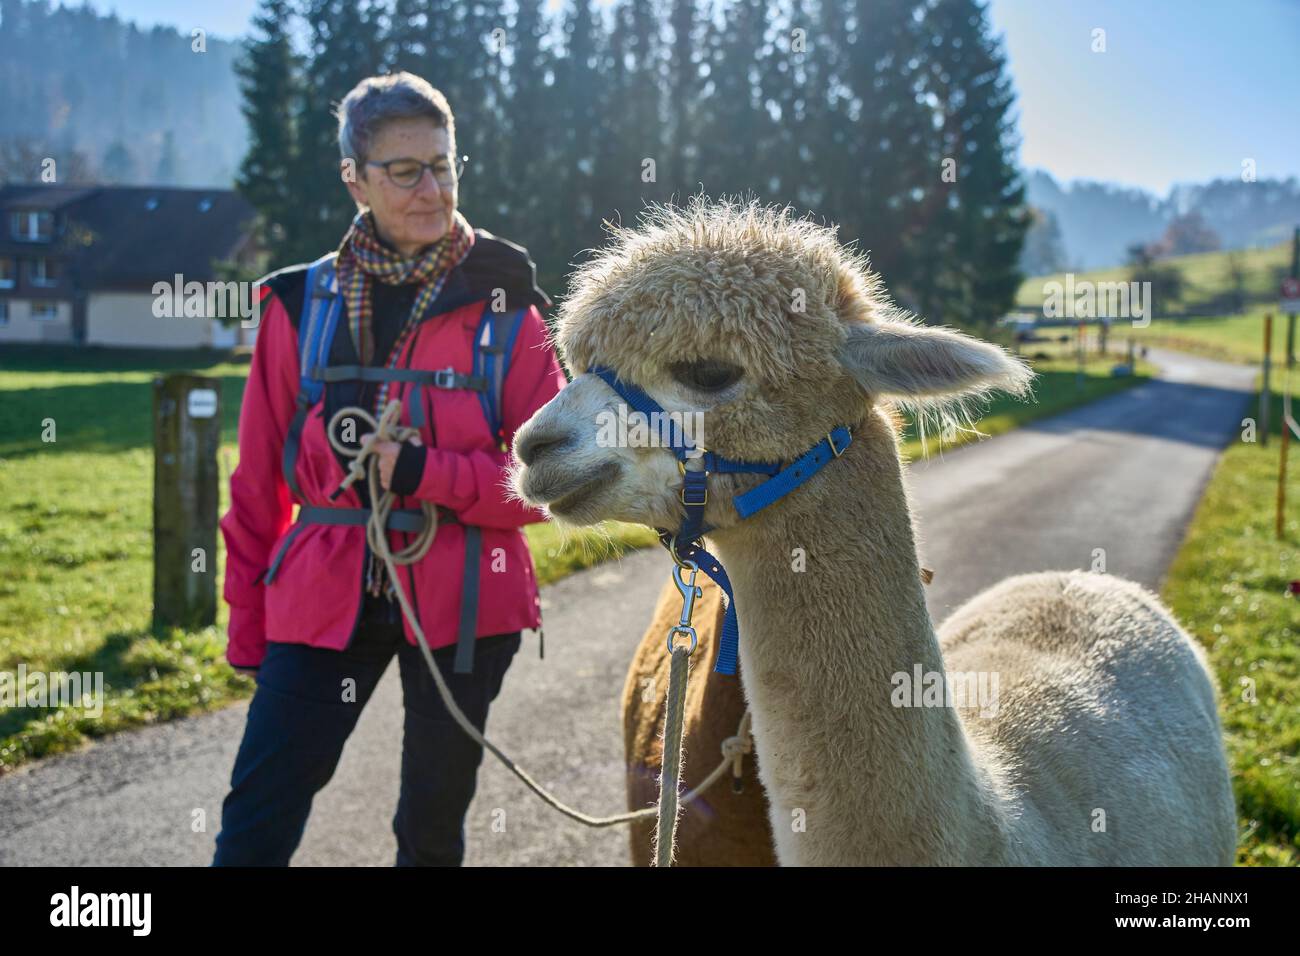 Woman In Red Jacket Leads Two Alpacas, Beige And Brown, For A Walk. In The Background Road, Meadow, Trees, Blue Sky. Bauma, Zurich Oberland, Switzerla Stock Photo